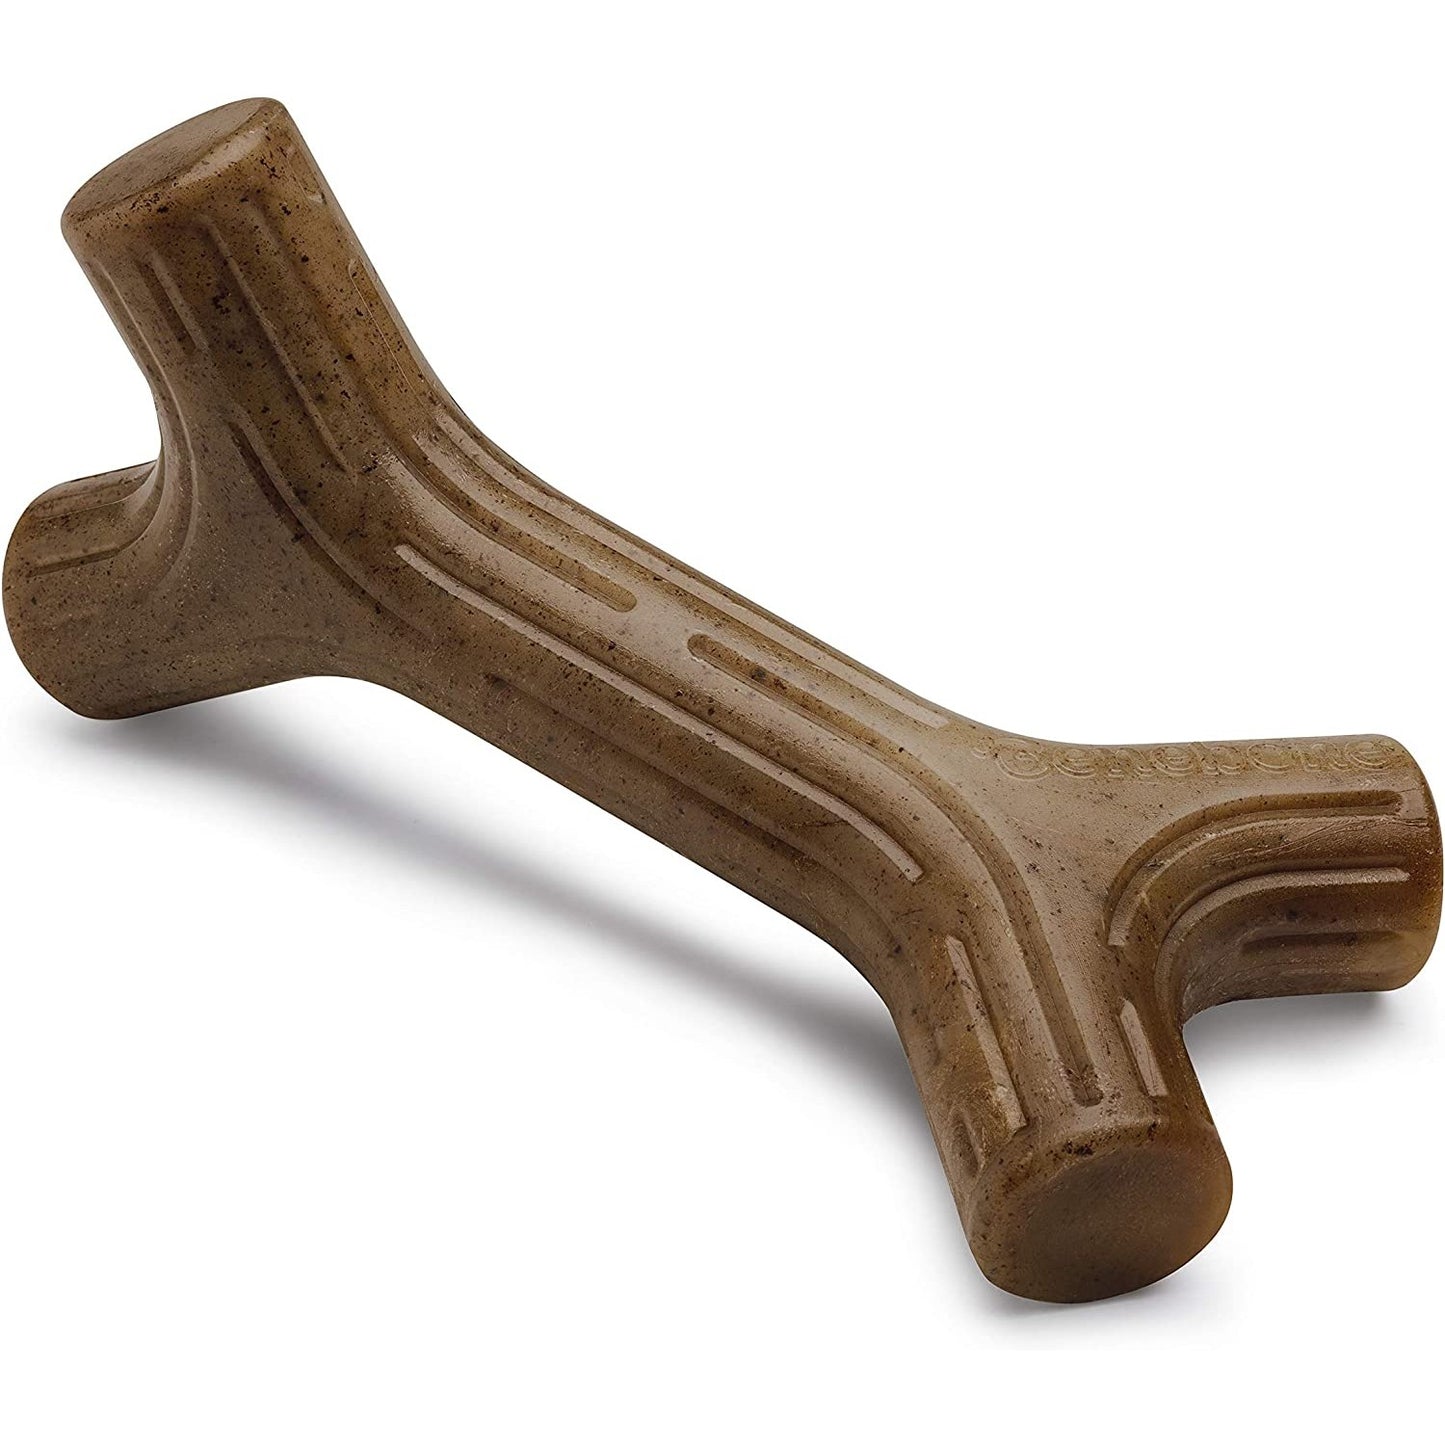 A bacon chew toy for dogs in the shape of a bone.